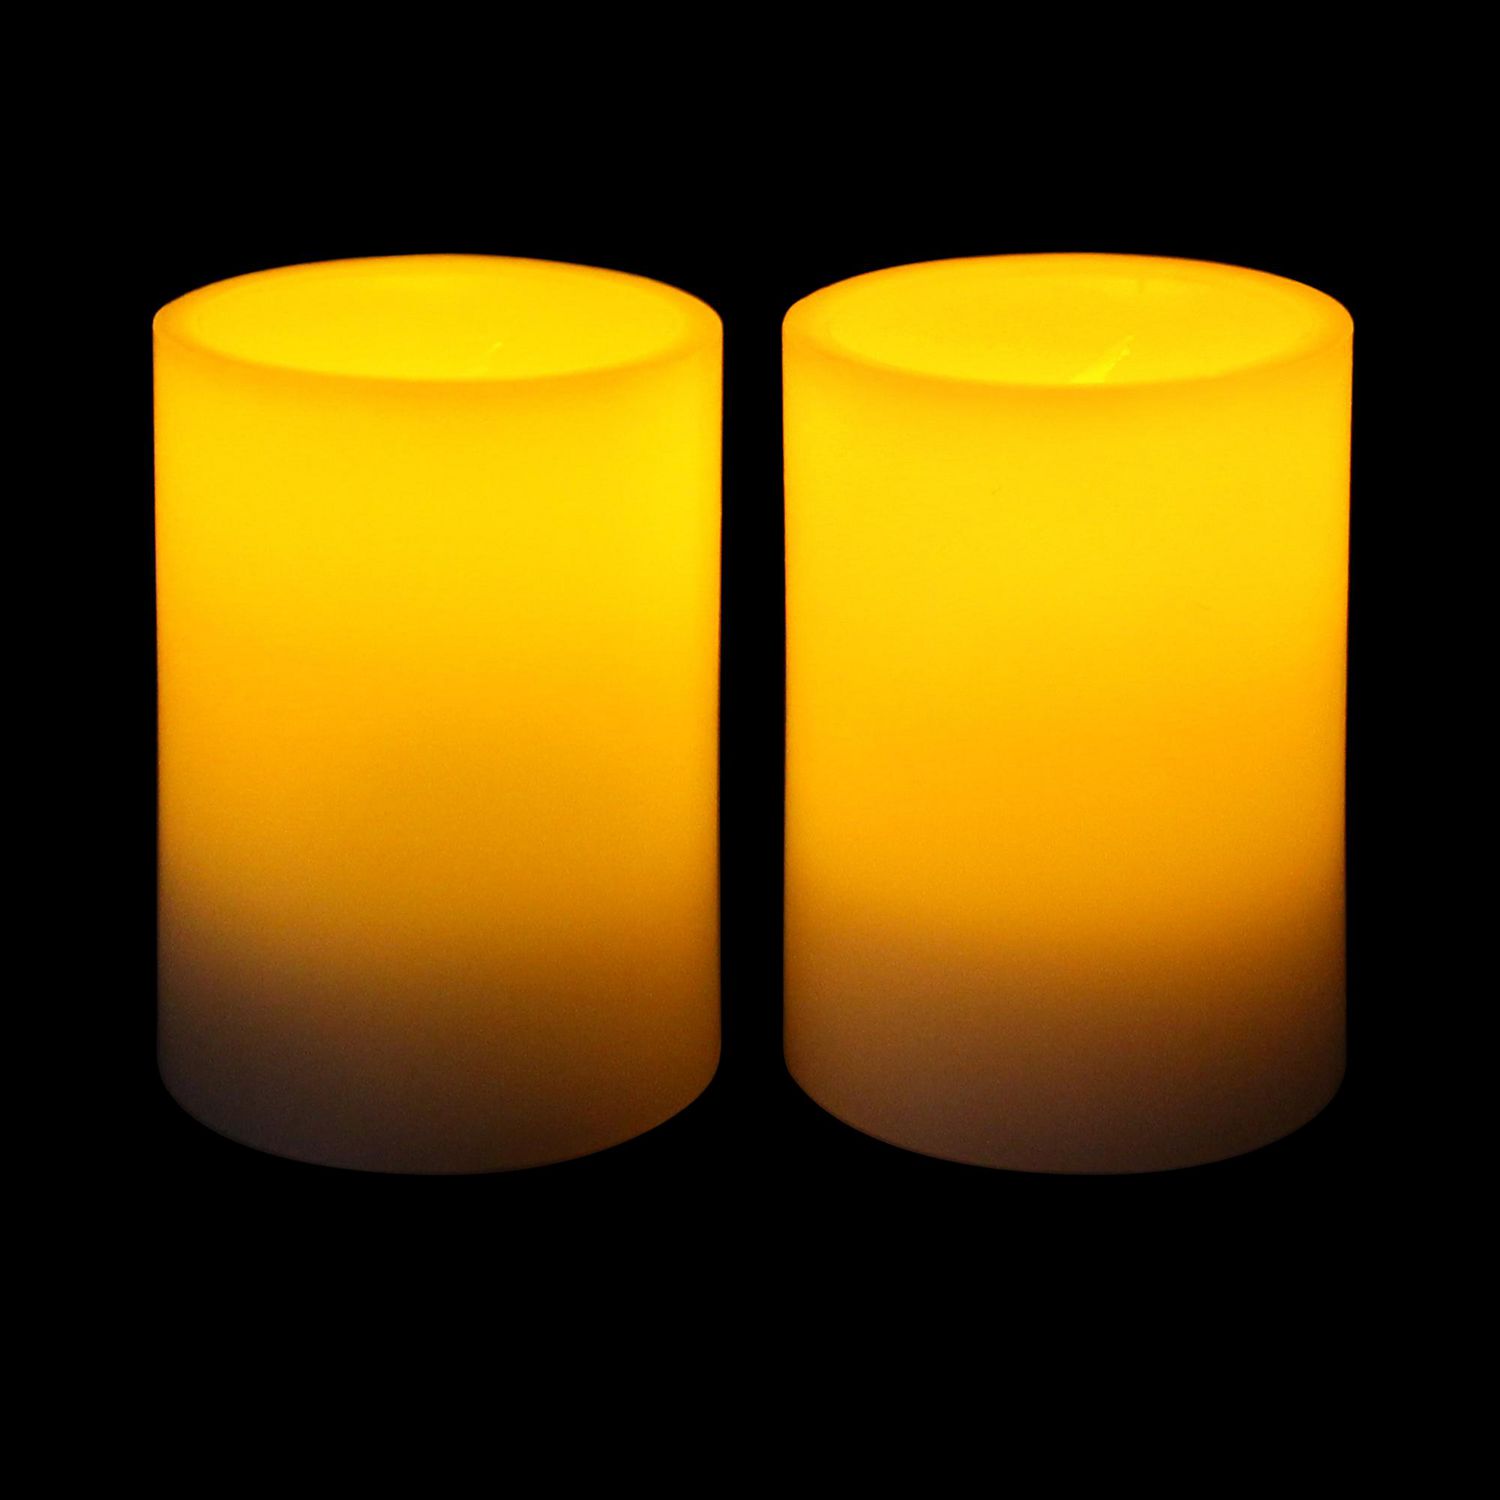 Mainstays 21PK Unscented Votive Candles, Pack of 21 